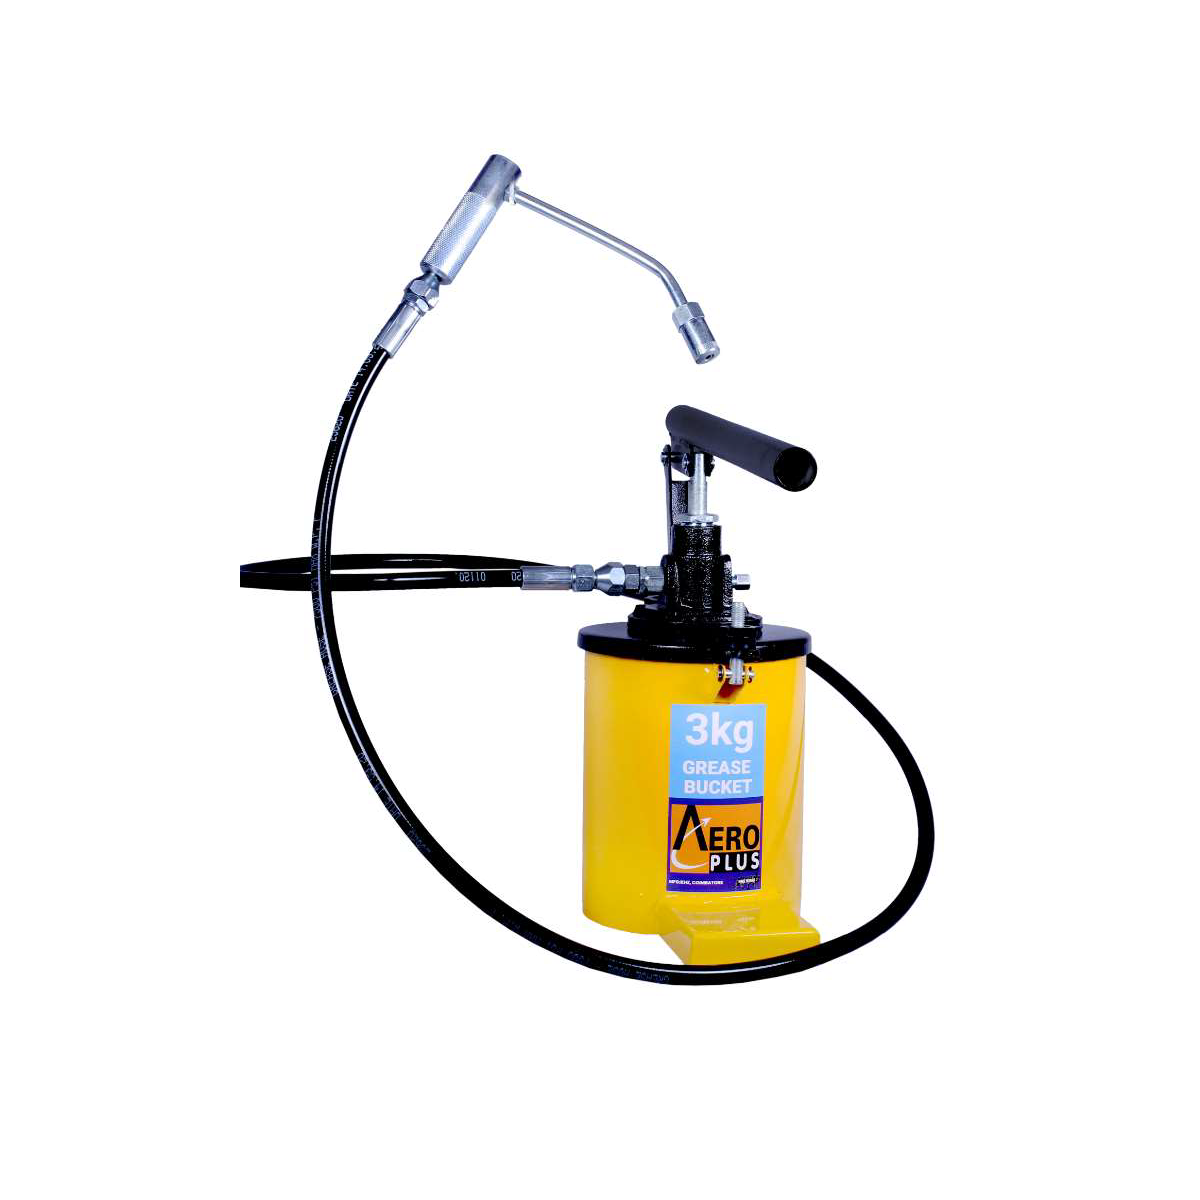 Aero Plus Hand Operated Grease Pump 3Kg Capacity with 2m Hose Pipe & Grease Gun